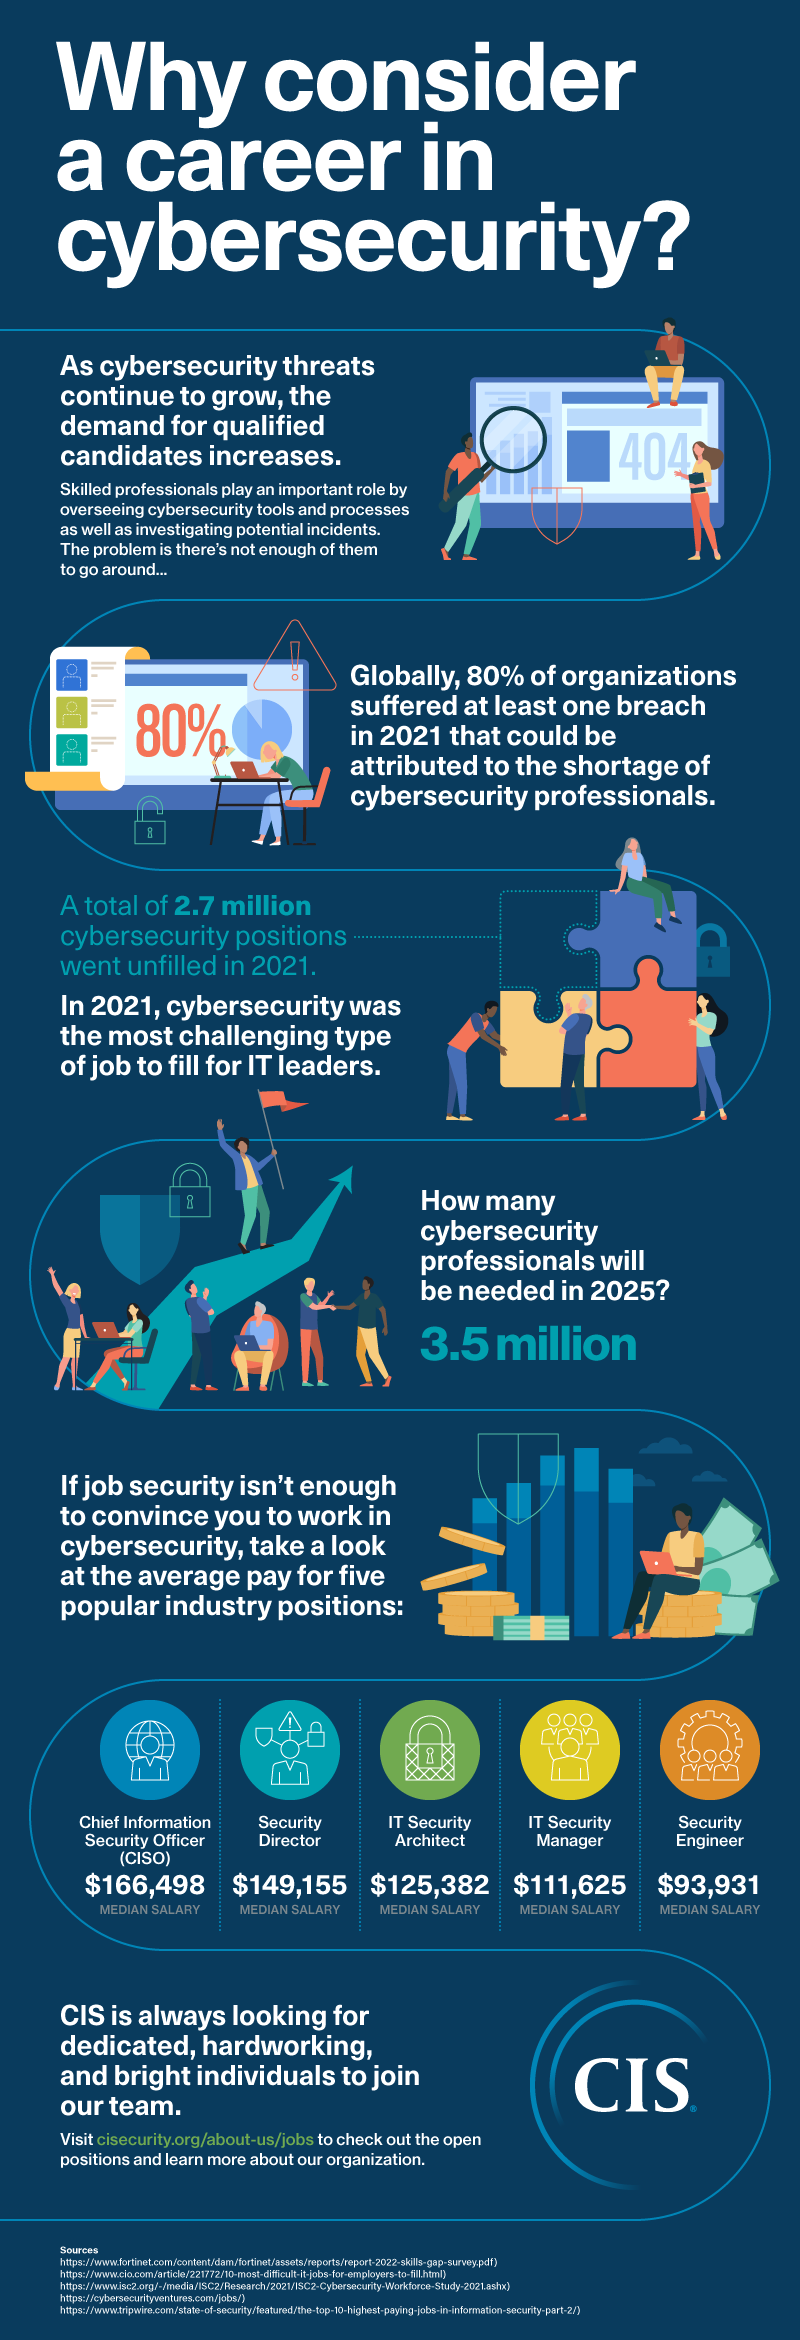 Career in cybersecurity infographic